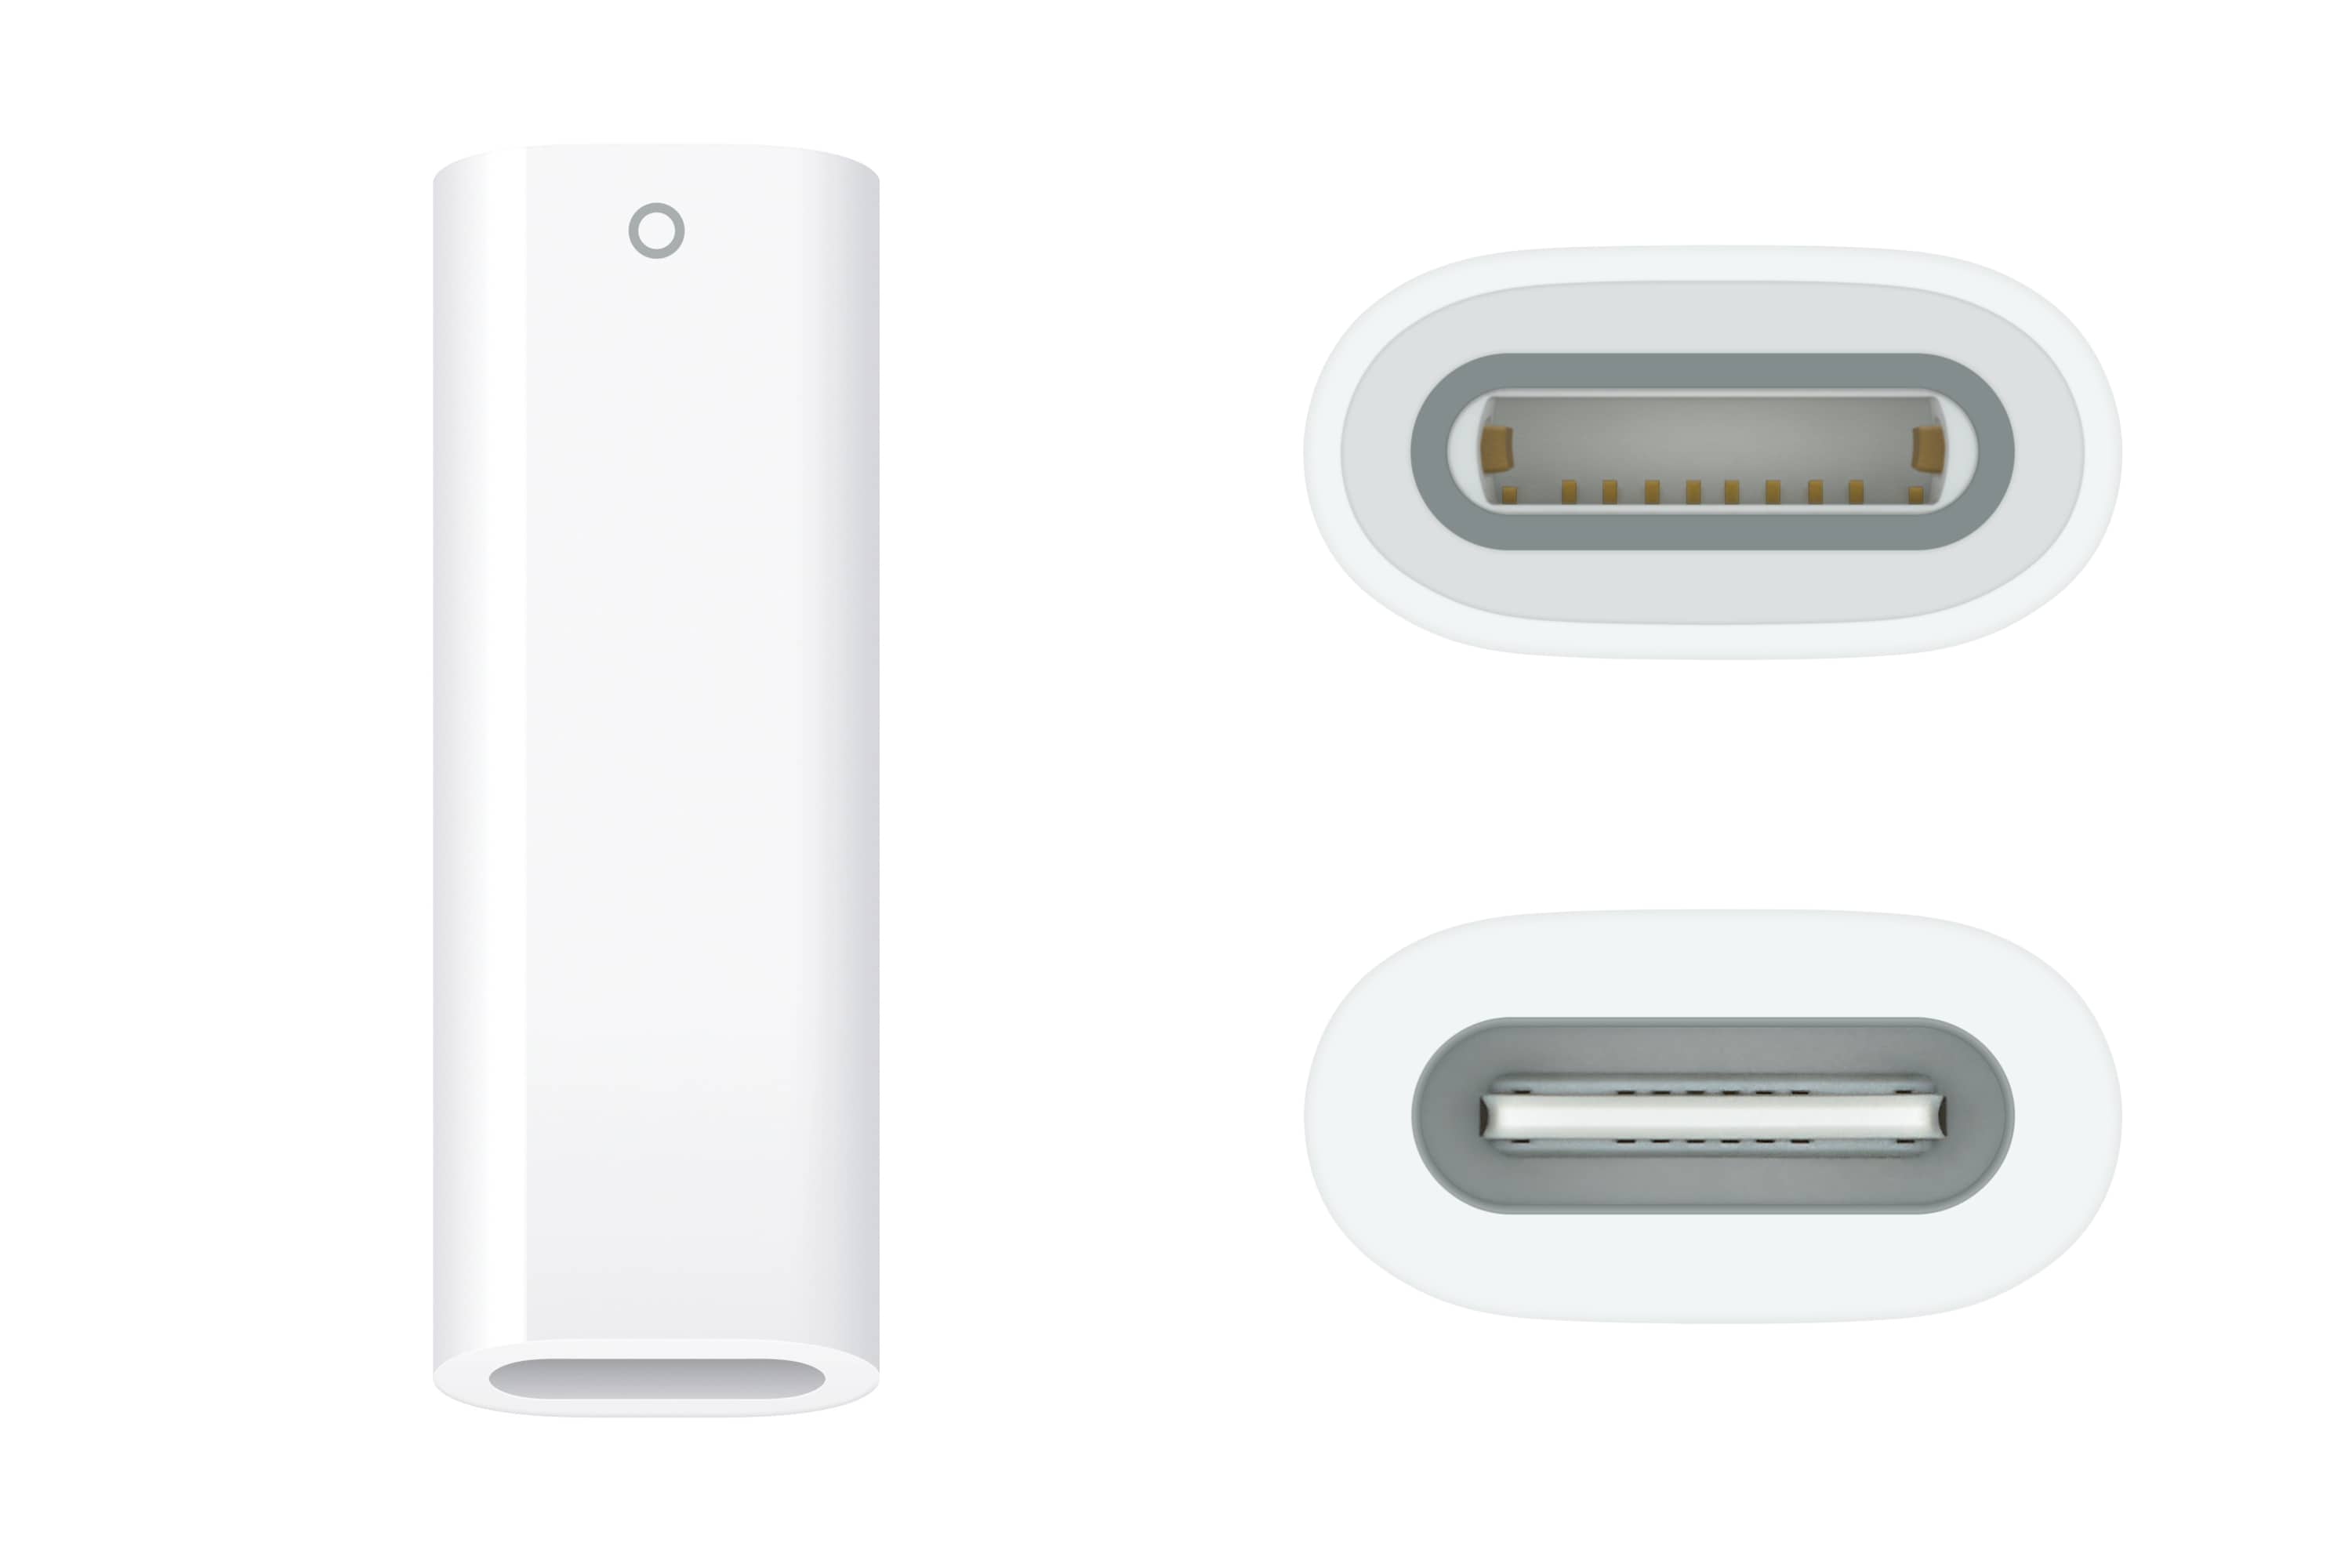 USB-C Pencil Power Adapter for Apple Pencil